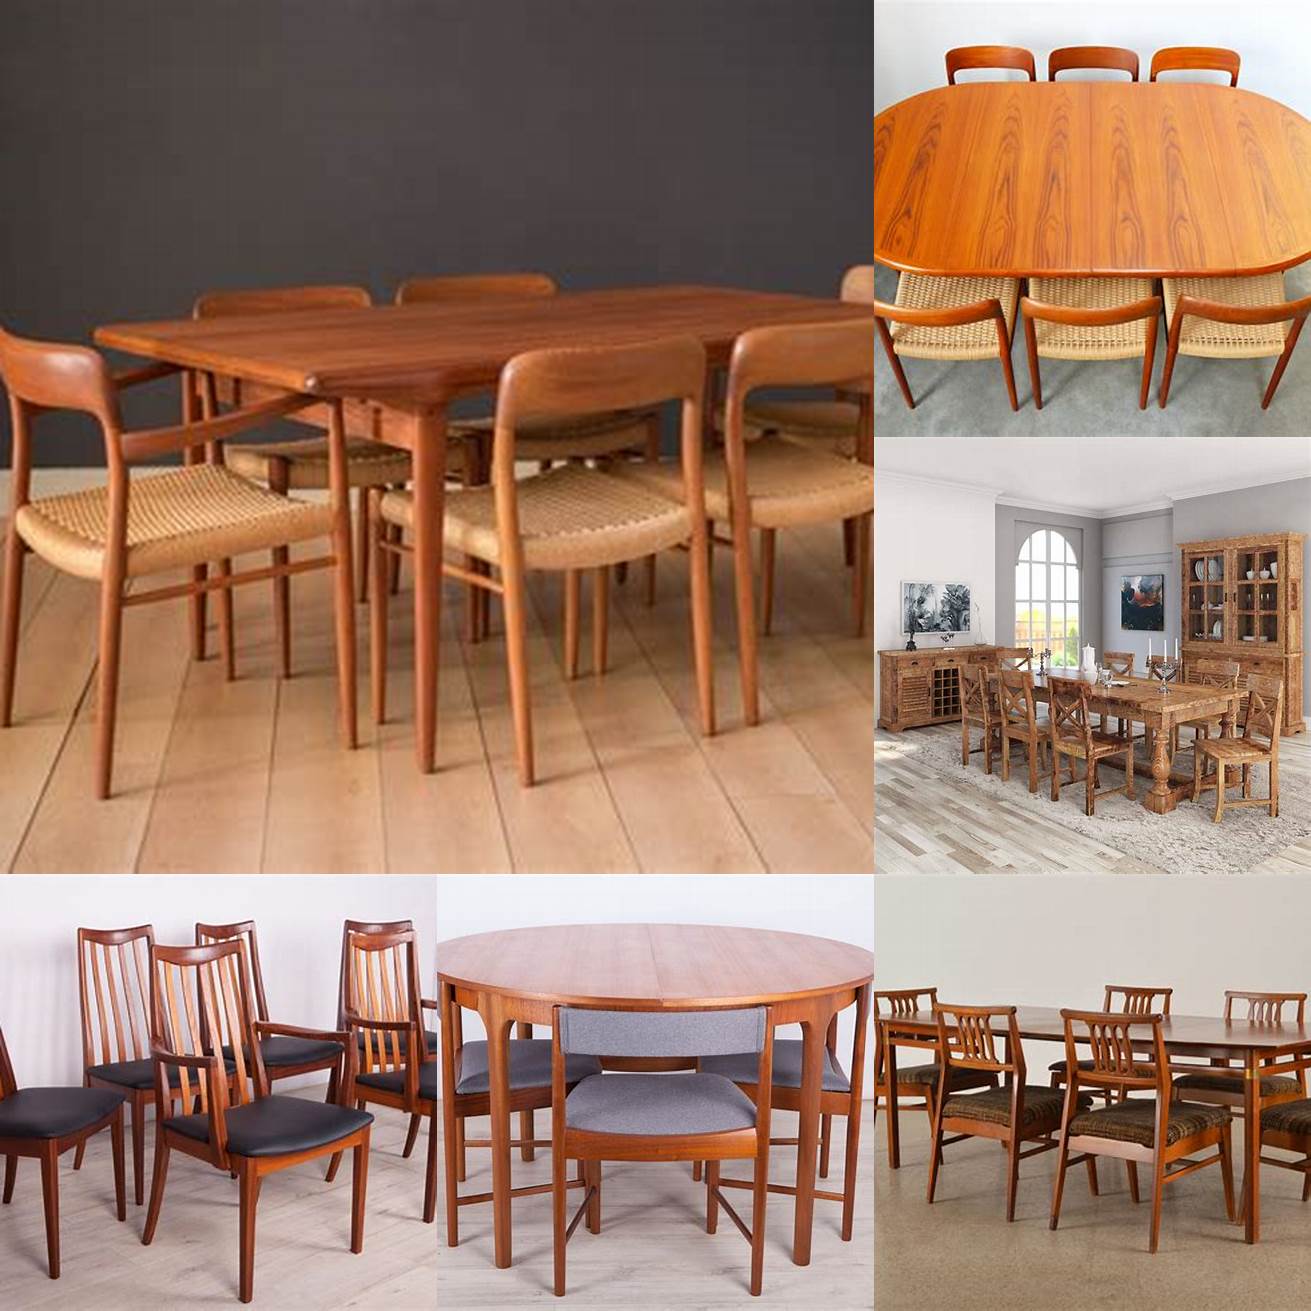 Teak Dining Chairs in a Traditional Setting